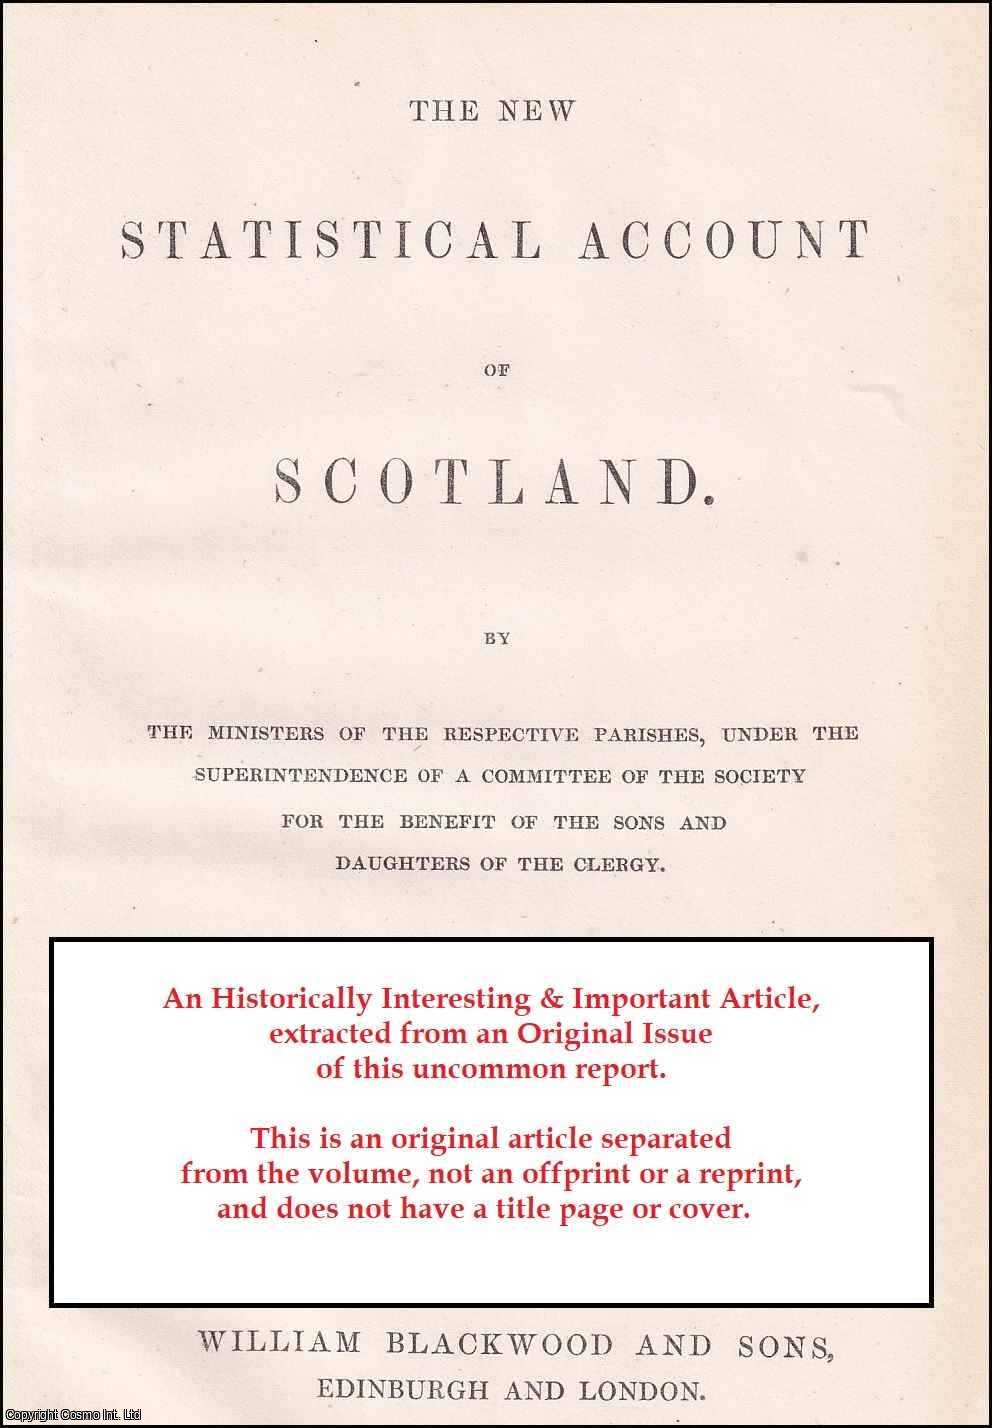 Rev. John Alpine - Parish of Skirling. Presbytery of Biggar, Synod of Lothian and Tweeddale. An uncommon original article from The New Statistical Account of Scotland, 1845.